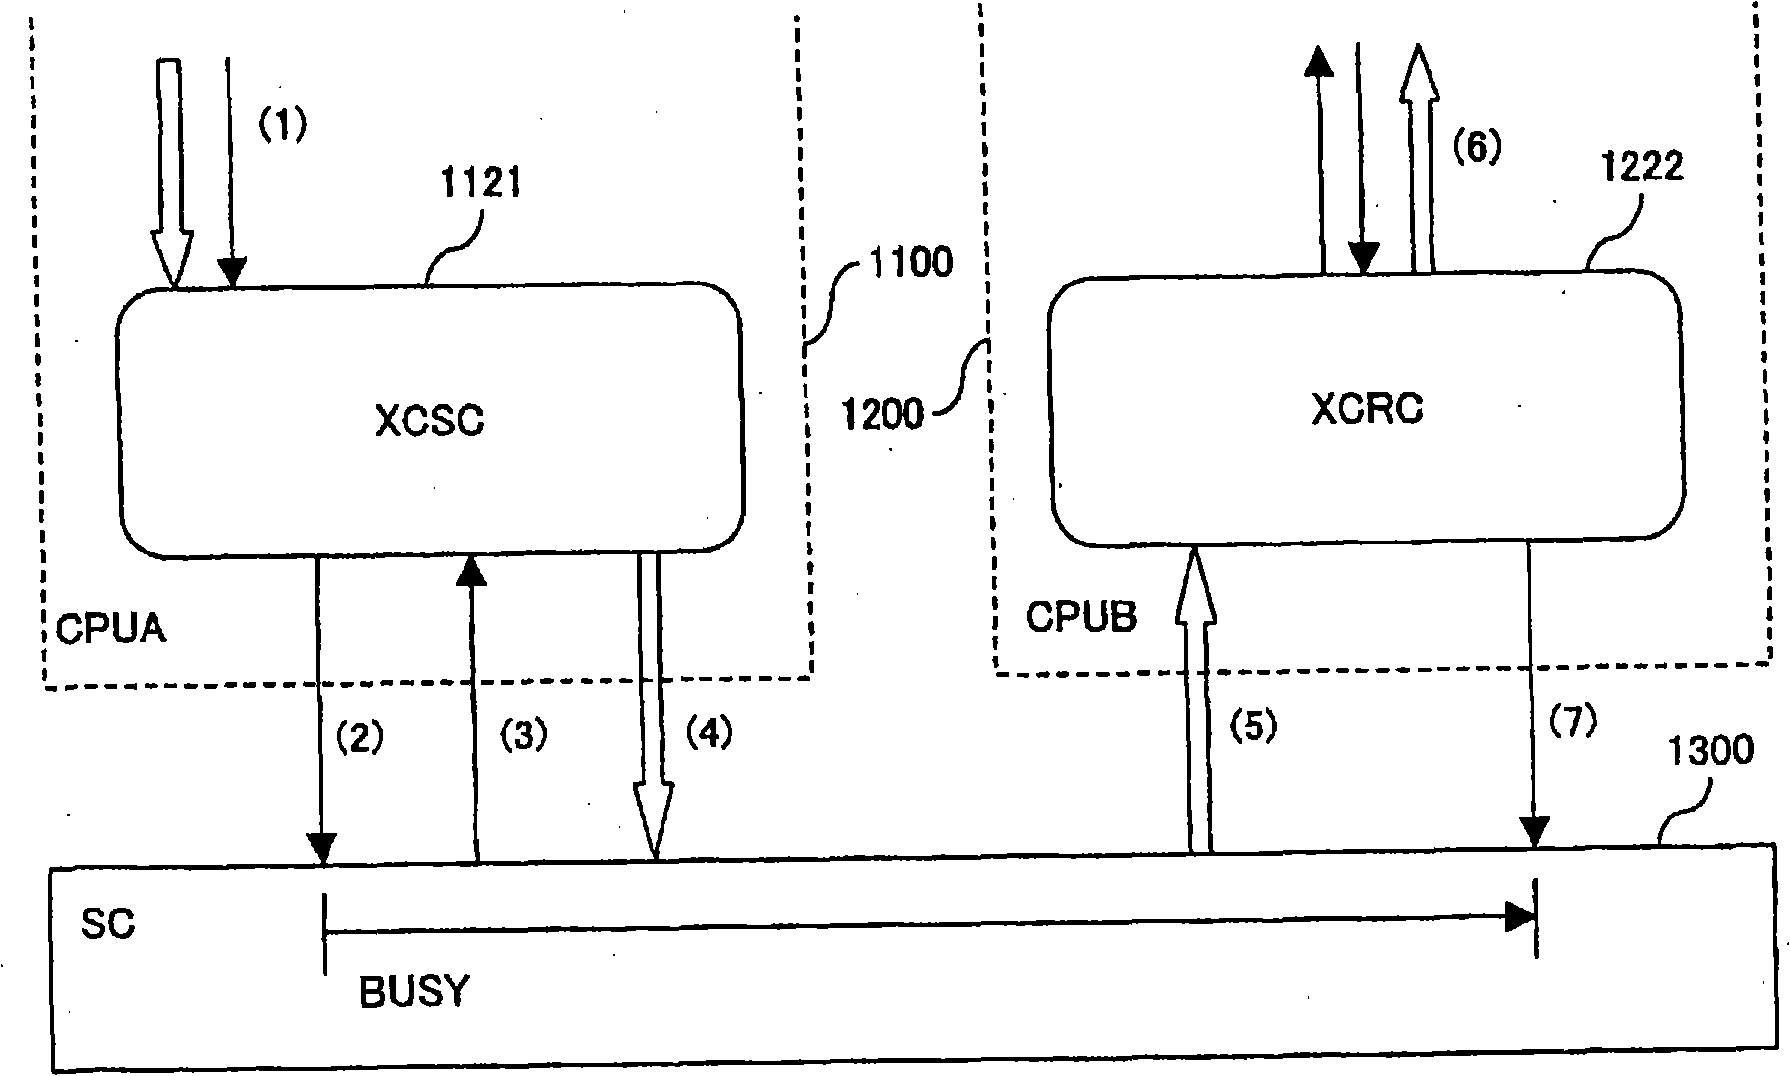 Operation processing device